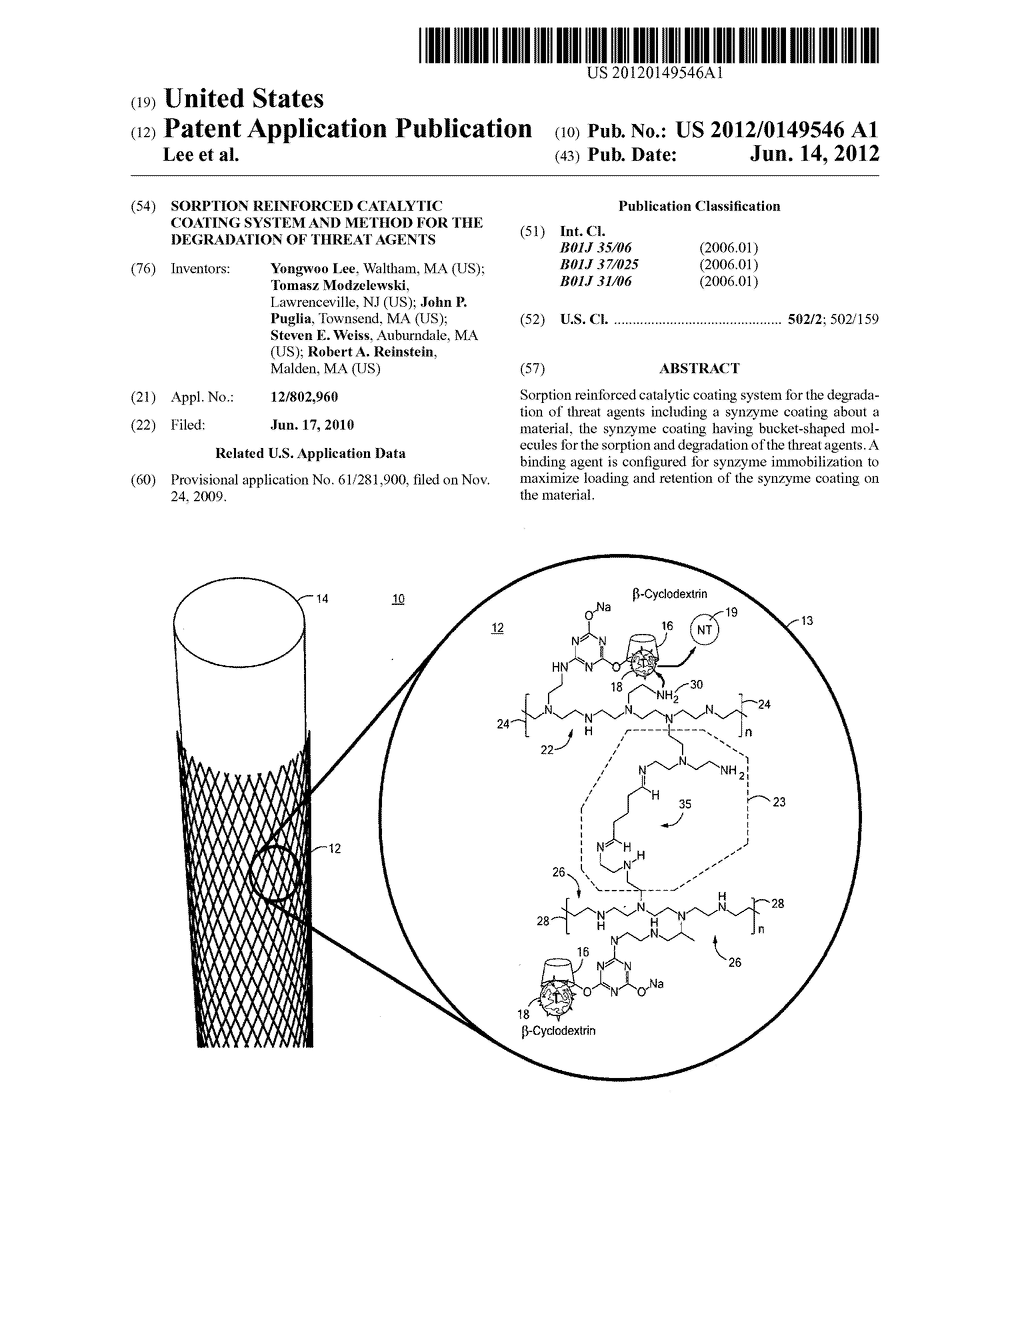 Sorption reinforced catalytic coating system and method for the     degradation of threat agents - diagram, schematic, and image 01